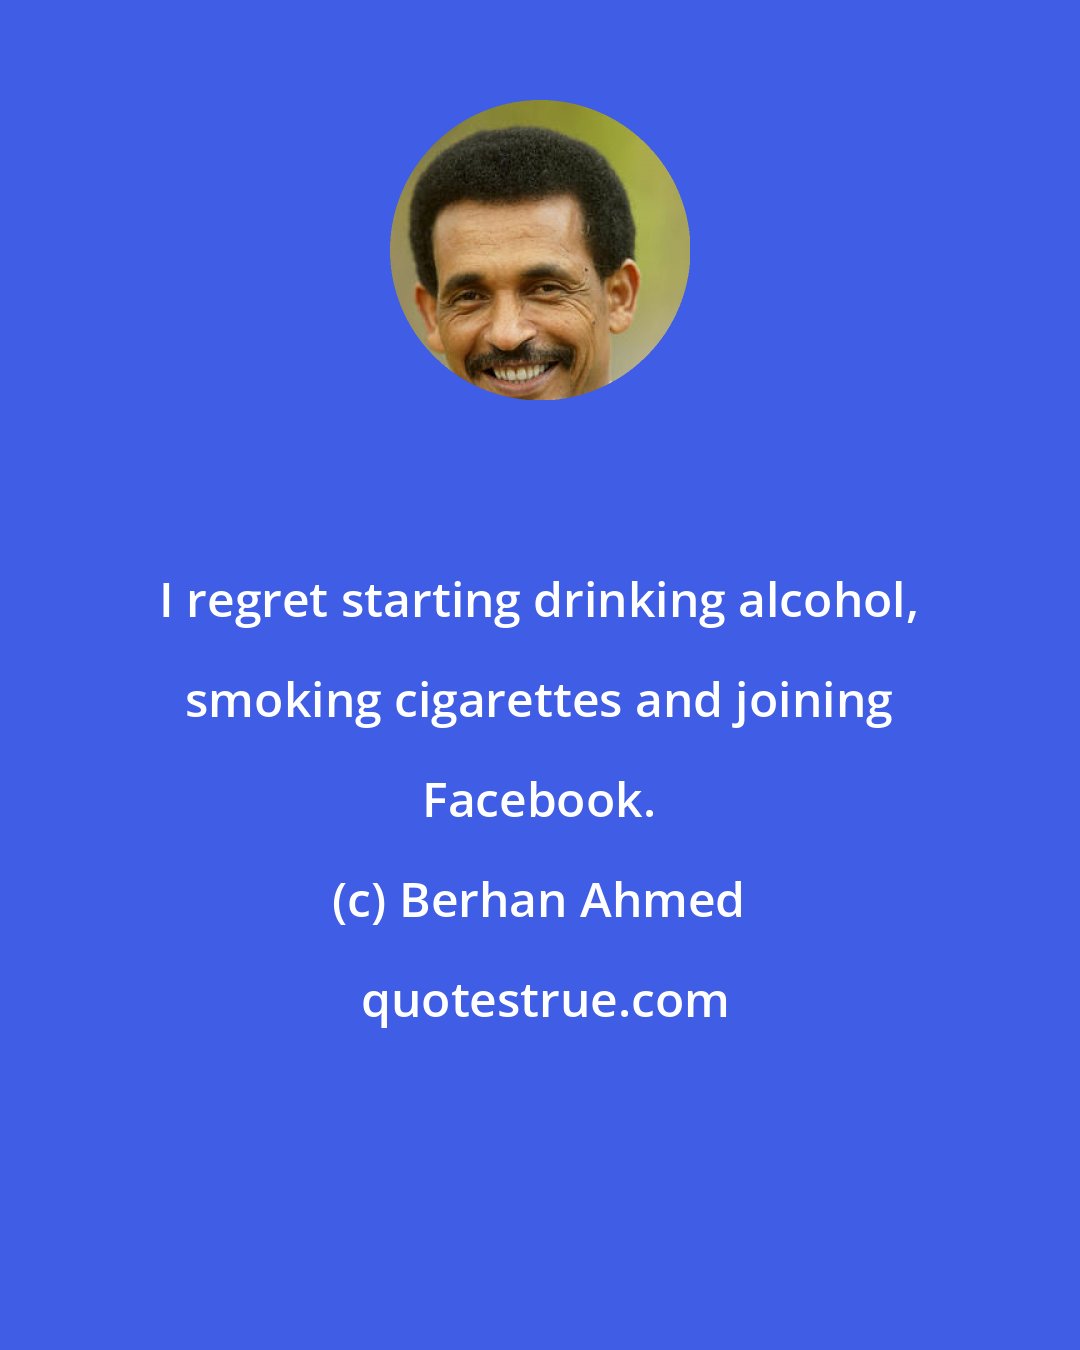 Berhan Ahmed: I regret starting drinking alcohol, smoking cigarettes and joining Facebook.